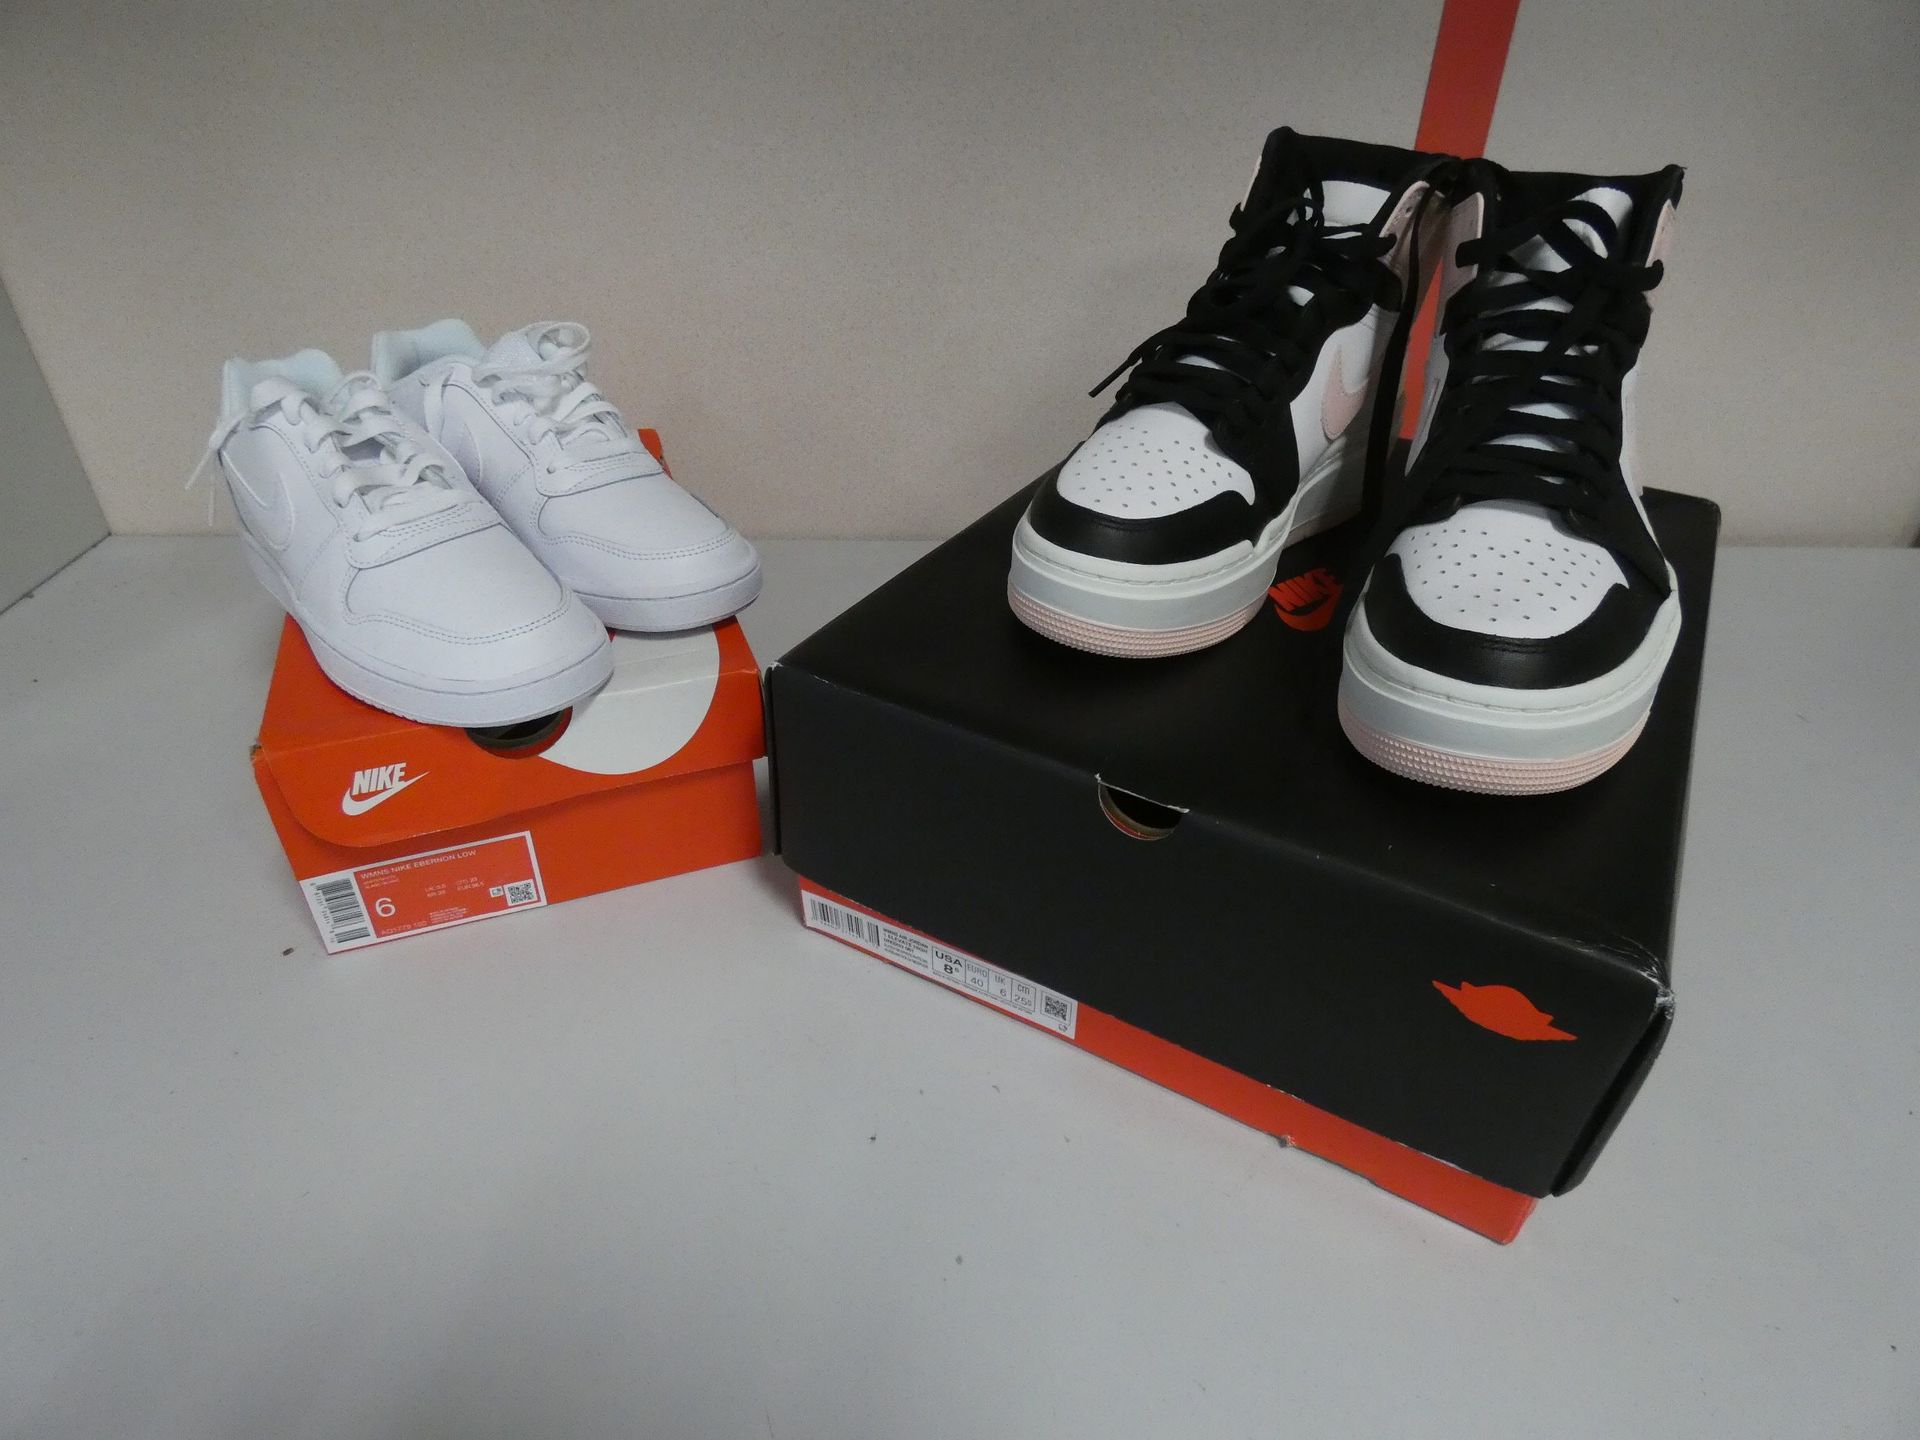 Null A set of two pairs of sneakers in excellent condition.

Place of deposit: M&hellip;